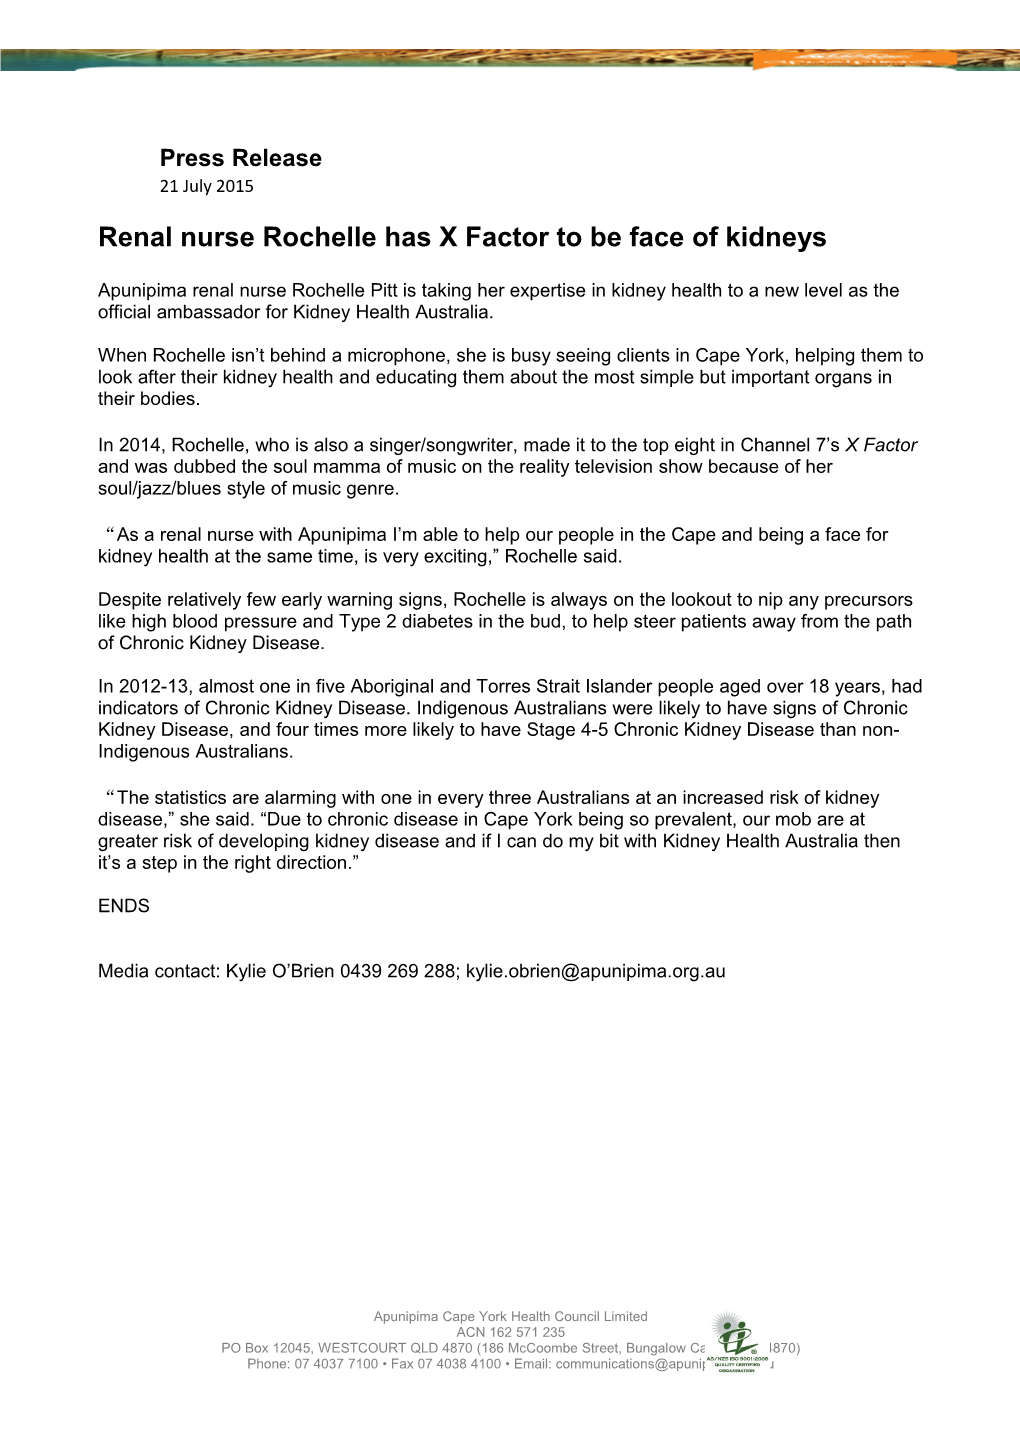 Renal Nurse Rochelle Has X Factor to Be Face of Kidneys